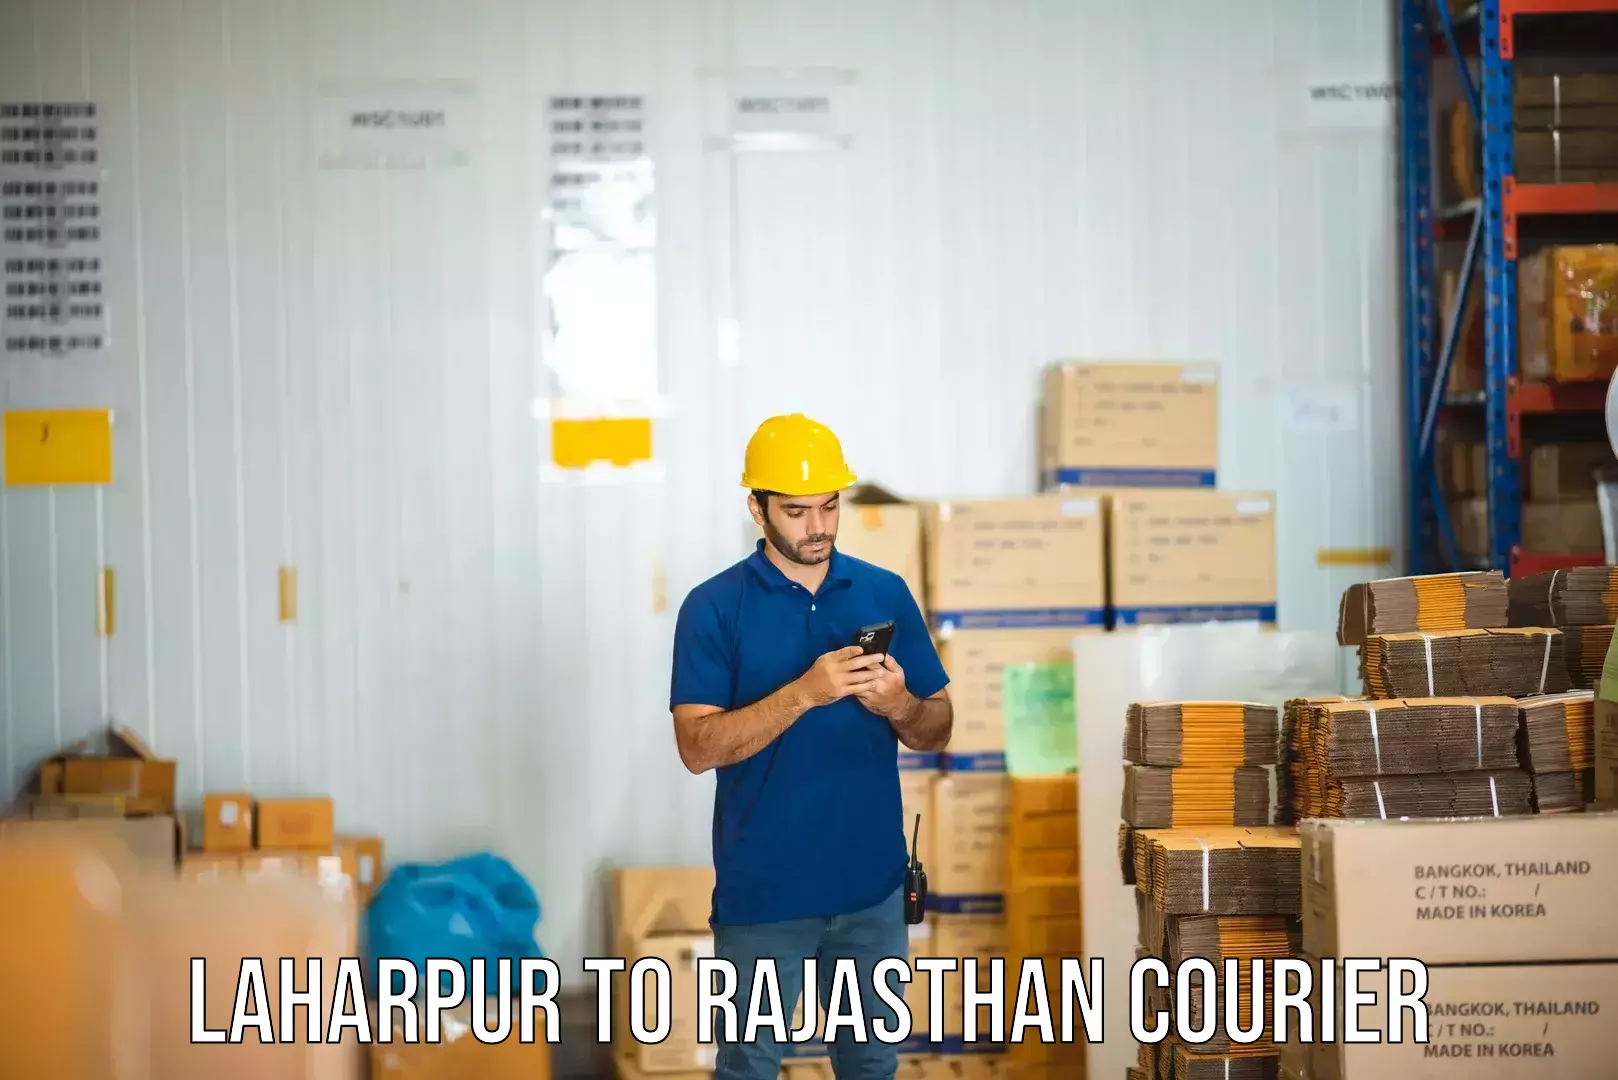 Rural area delivery in Laharpur to Rajasthan